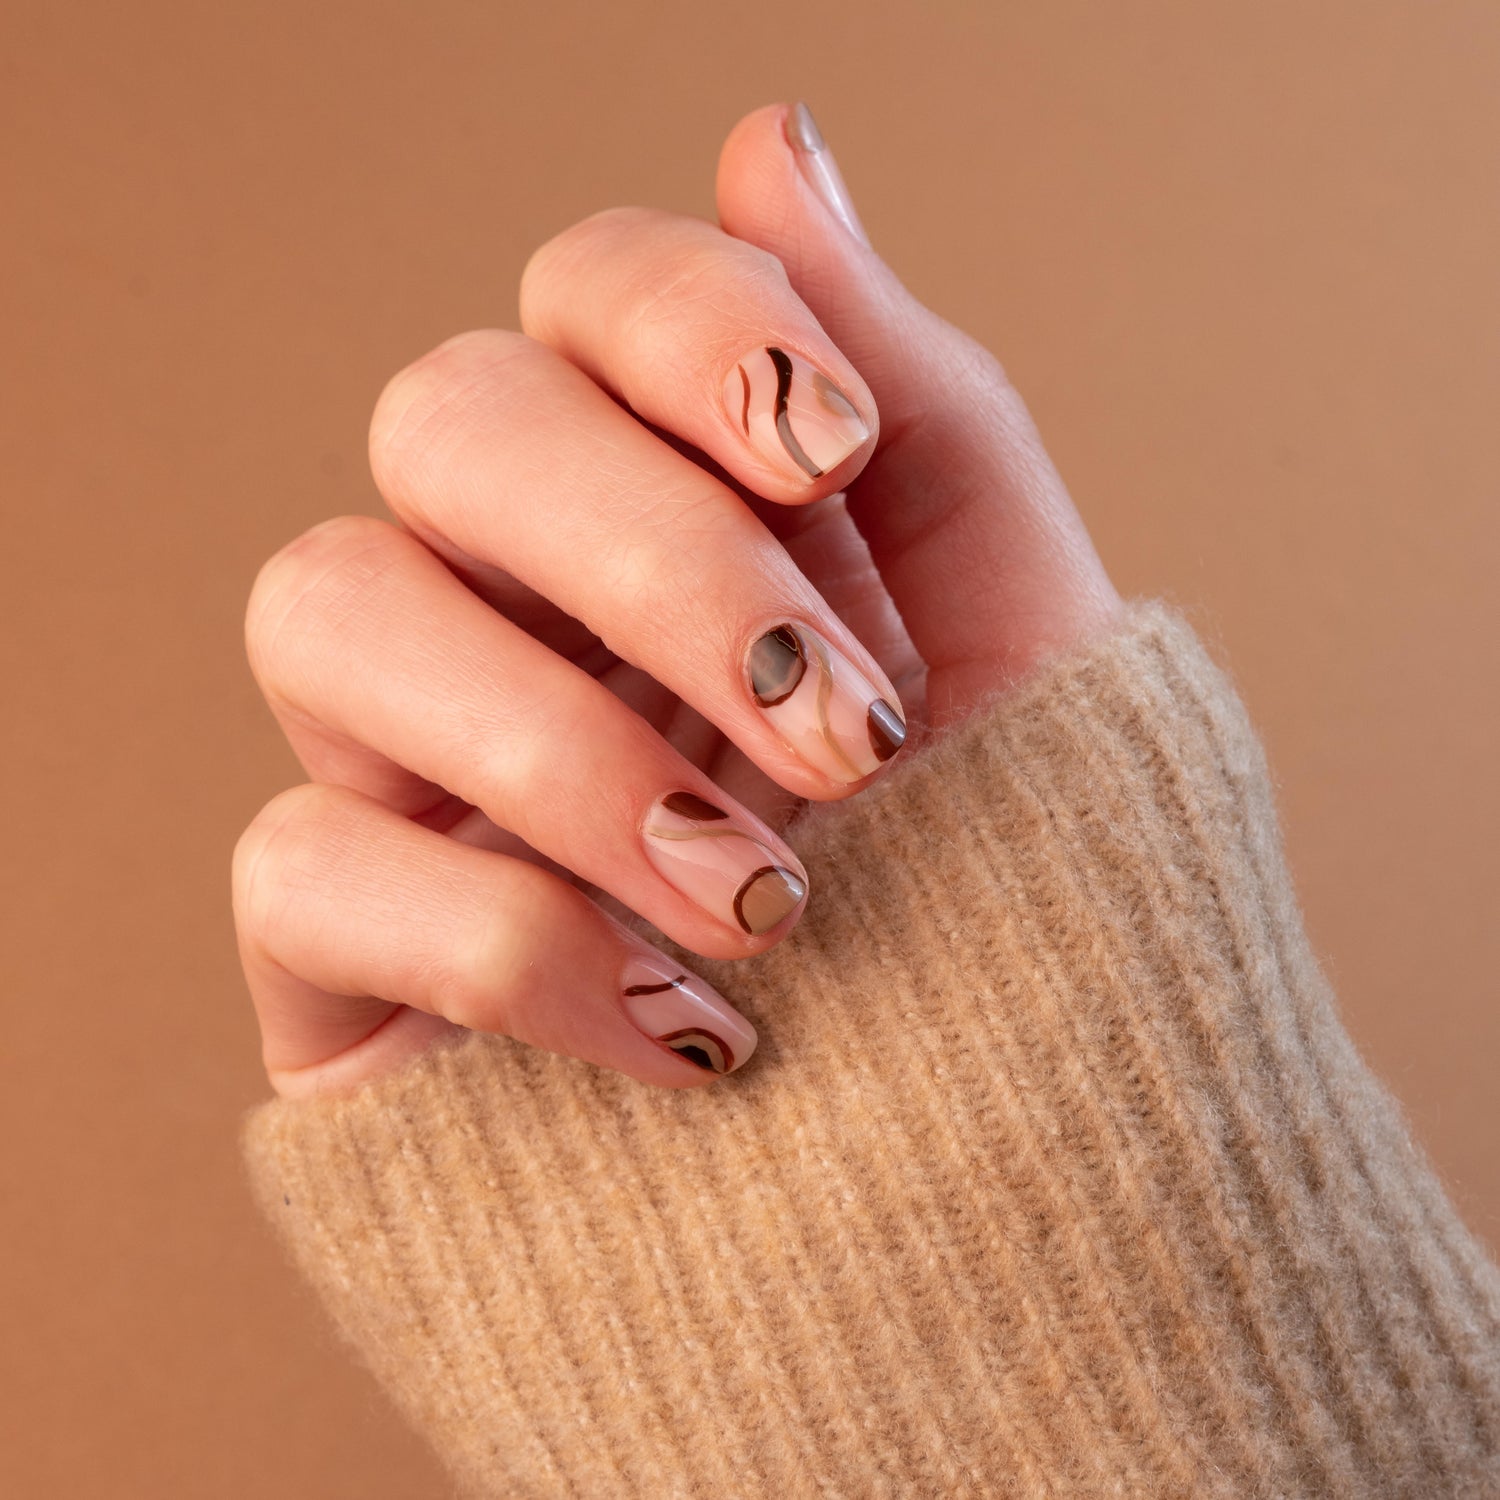 The Latte manicure: What is it and how do you do it?